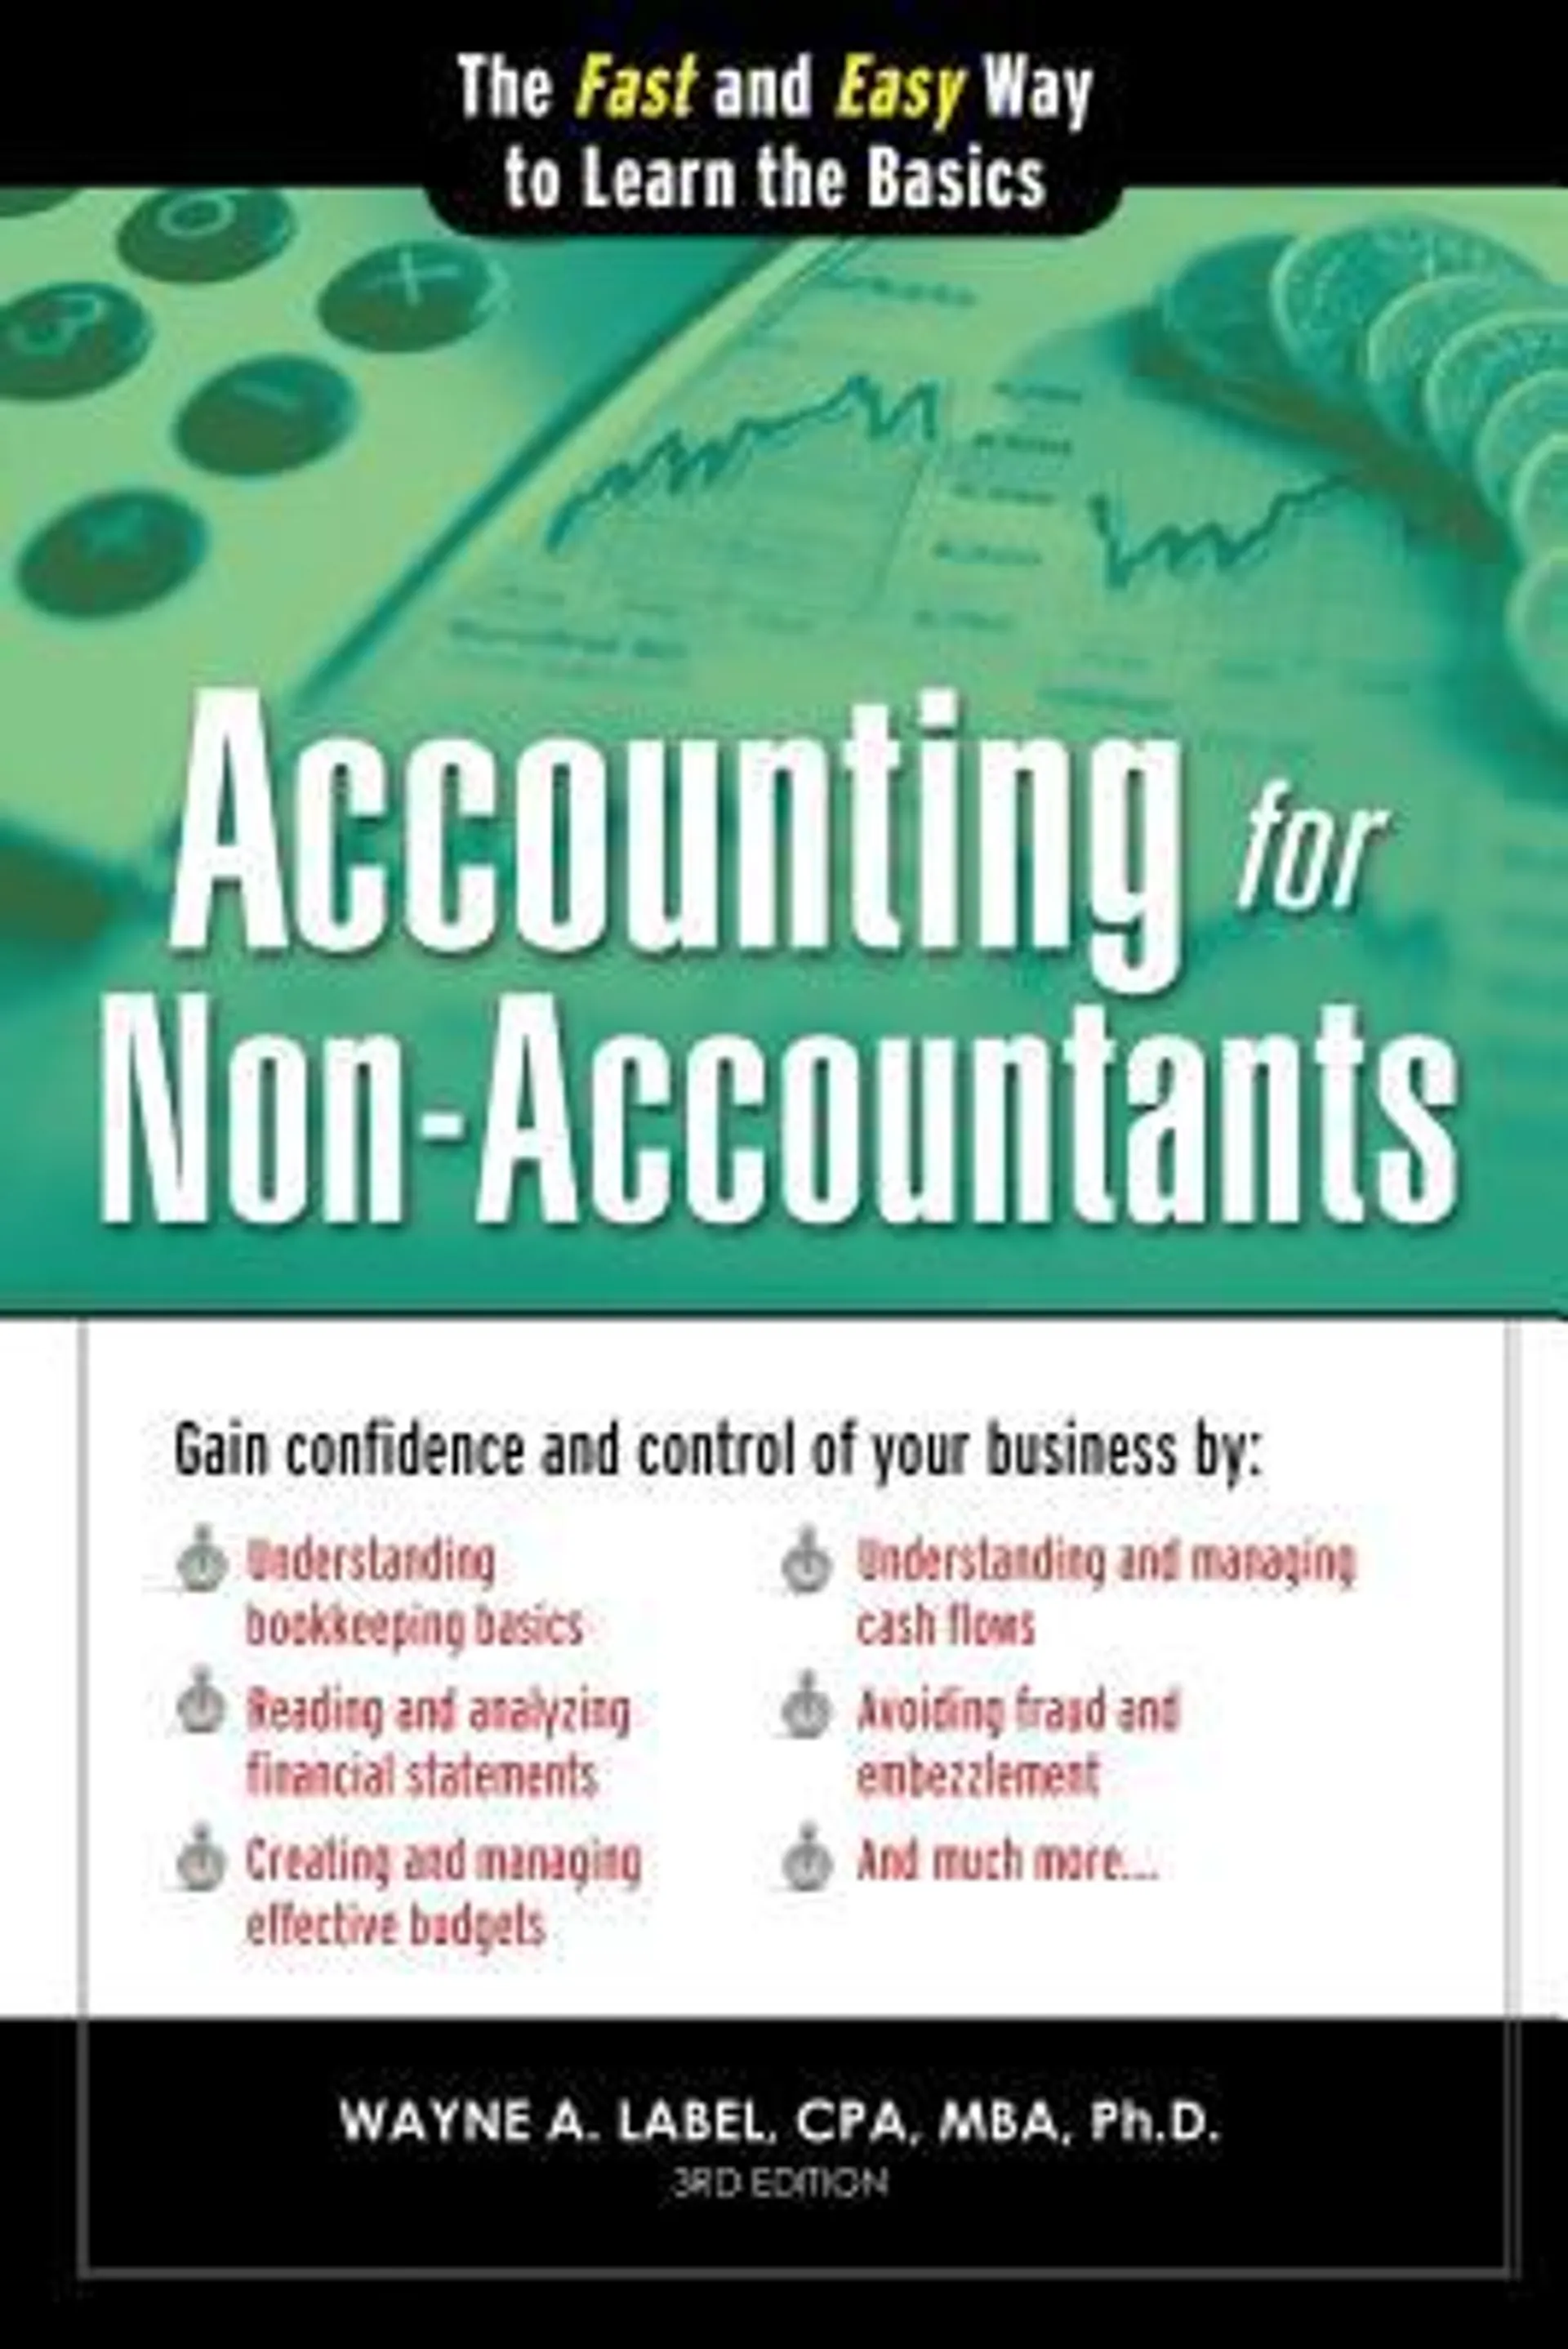 Accounting for Non-Accountants: The Fast and Easy Way to Learn the Basics (3rd edition)